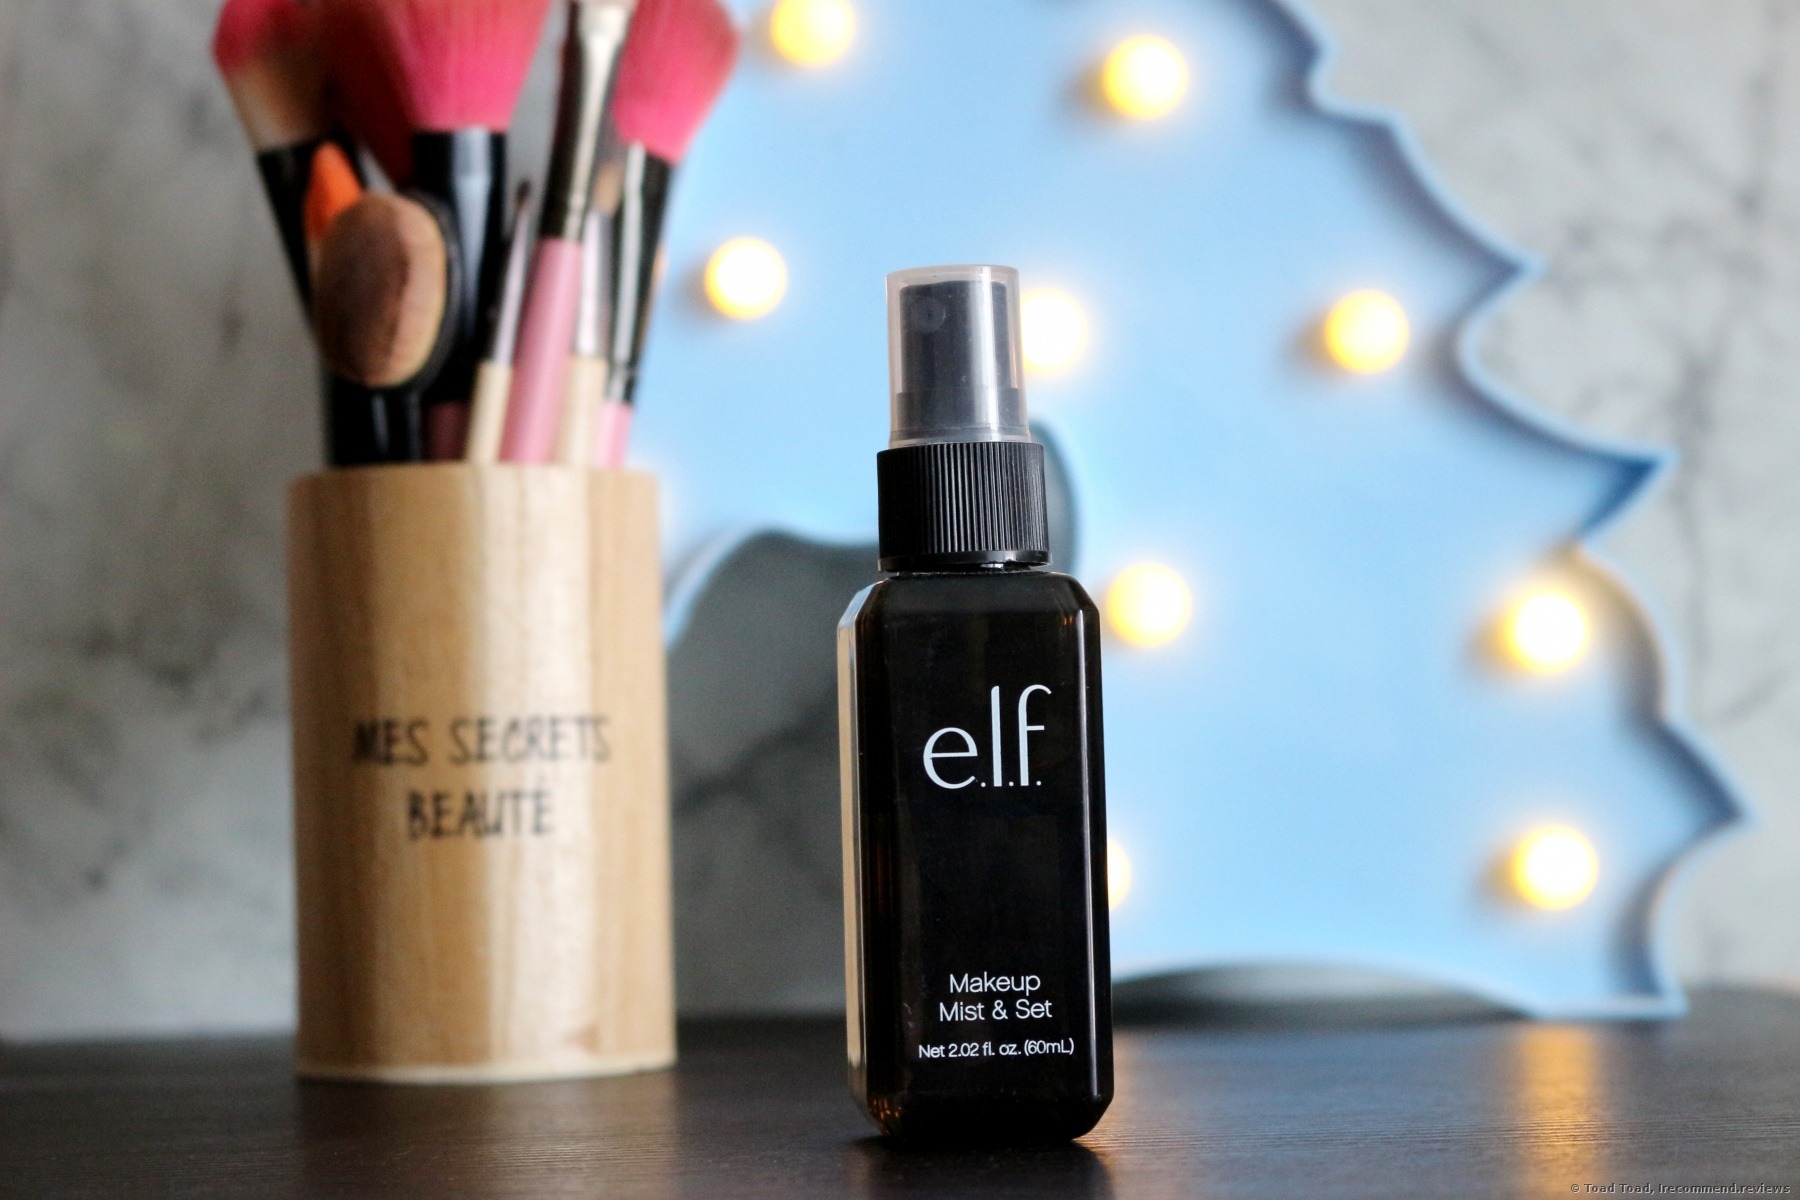 E.L.F. Makeup Mist & Set - «It depends what you're going to set and how. My review of the E.L.F. Mist & Set setting spray. » | Consumer reviews